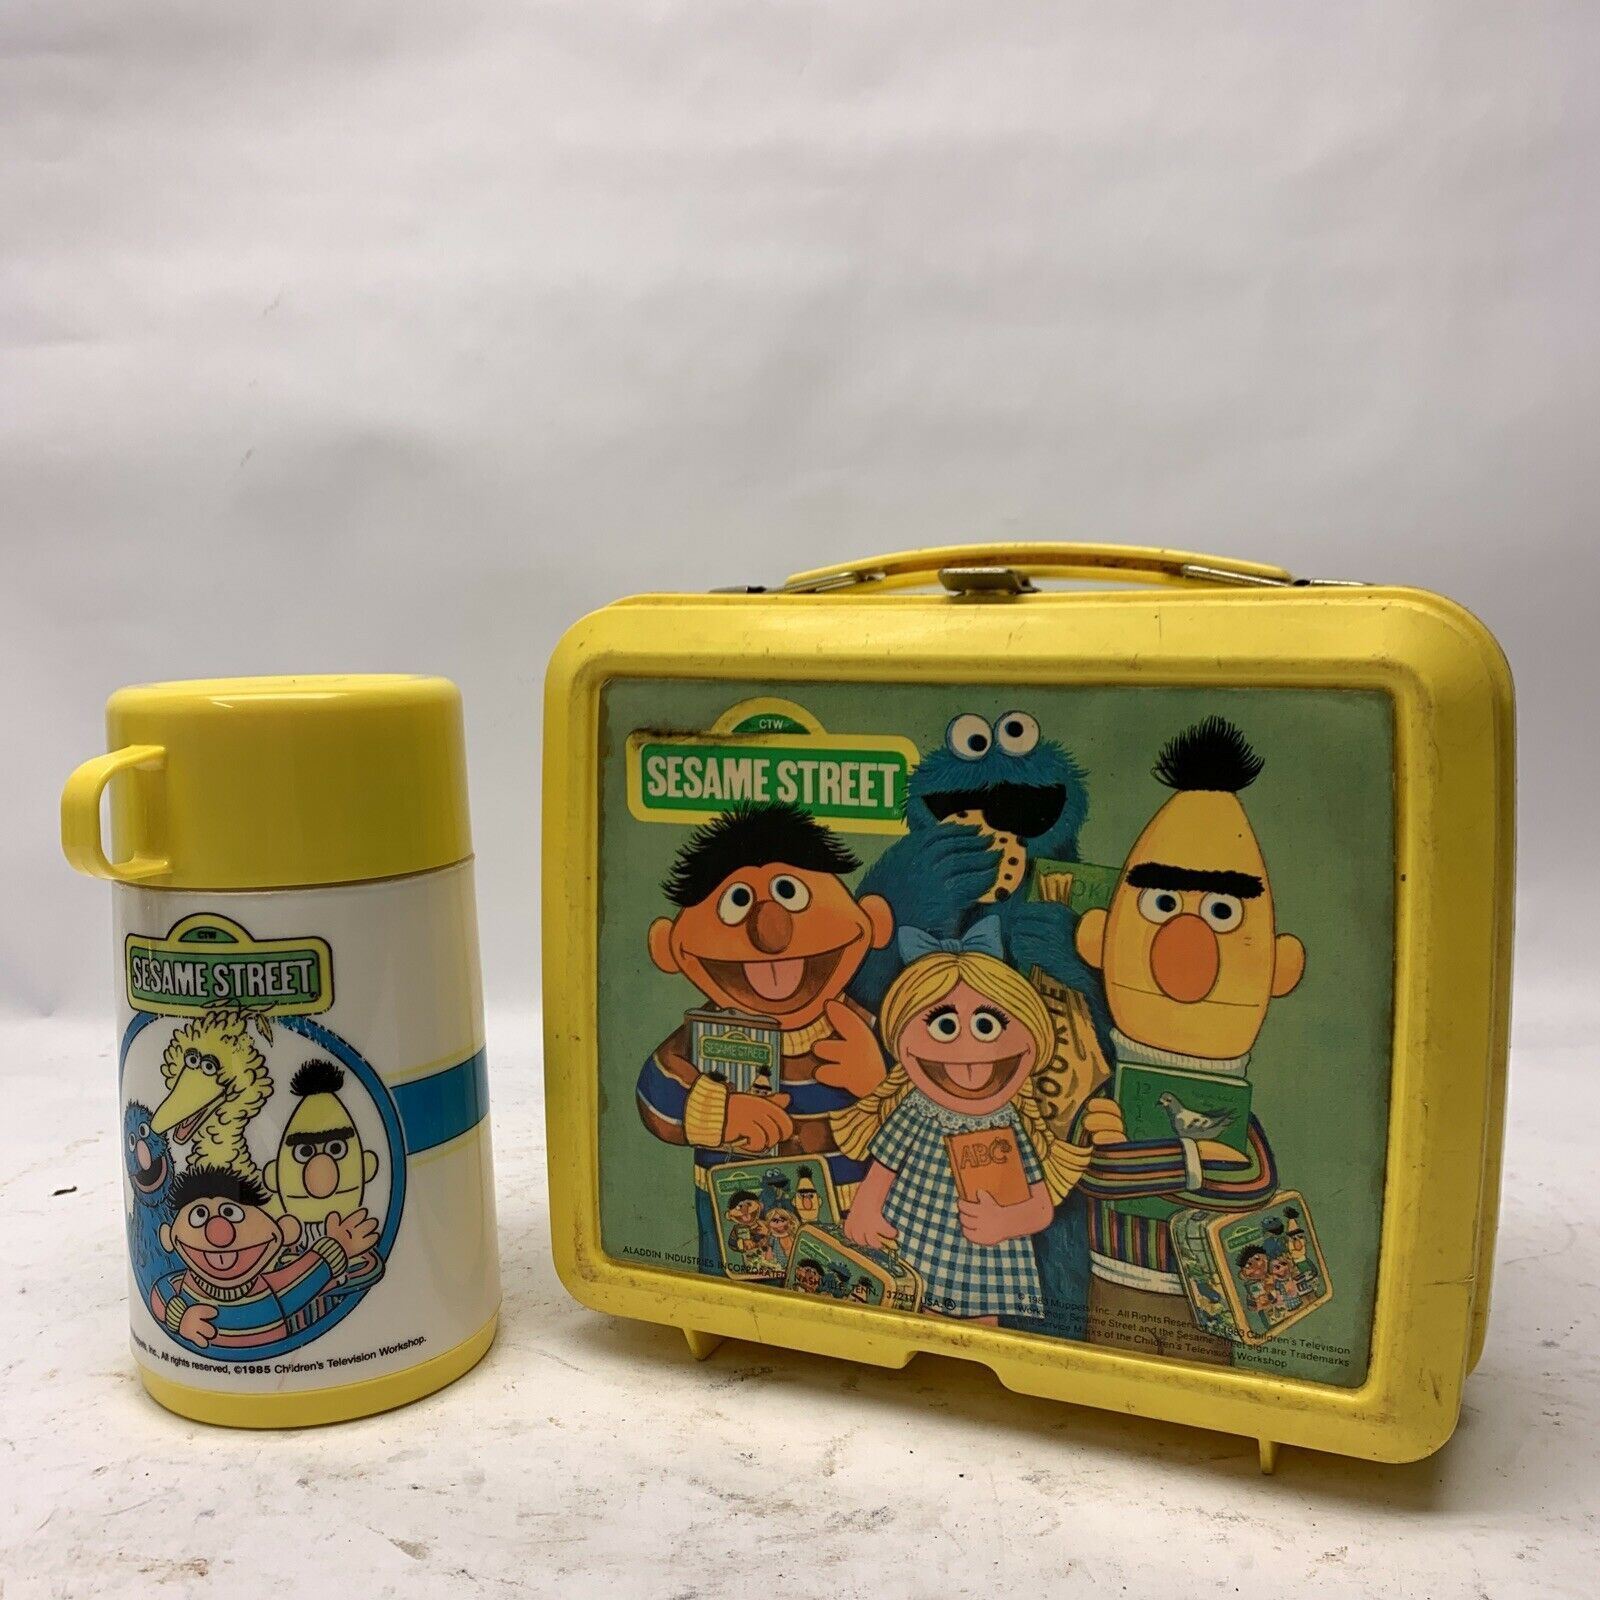 Vintage 1983 Sesame Street Metal Lunch Box With Thermos by Aladdin Big Bird, Ber